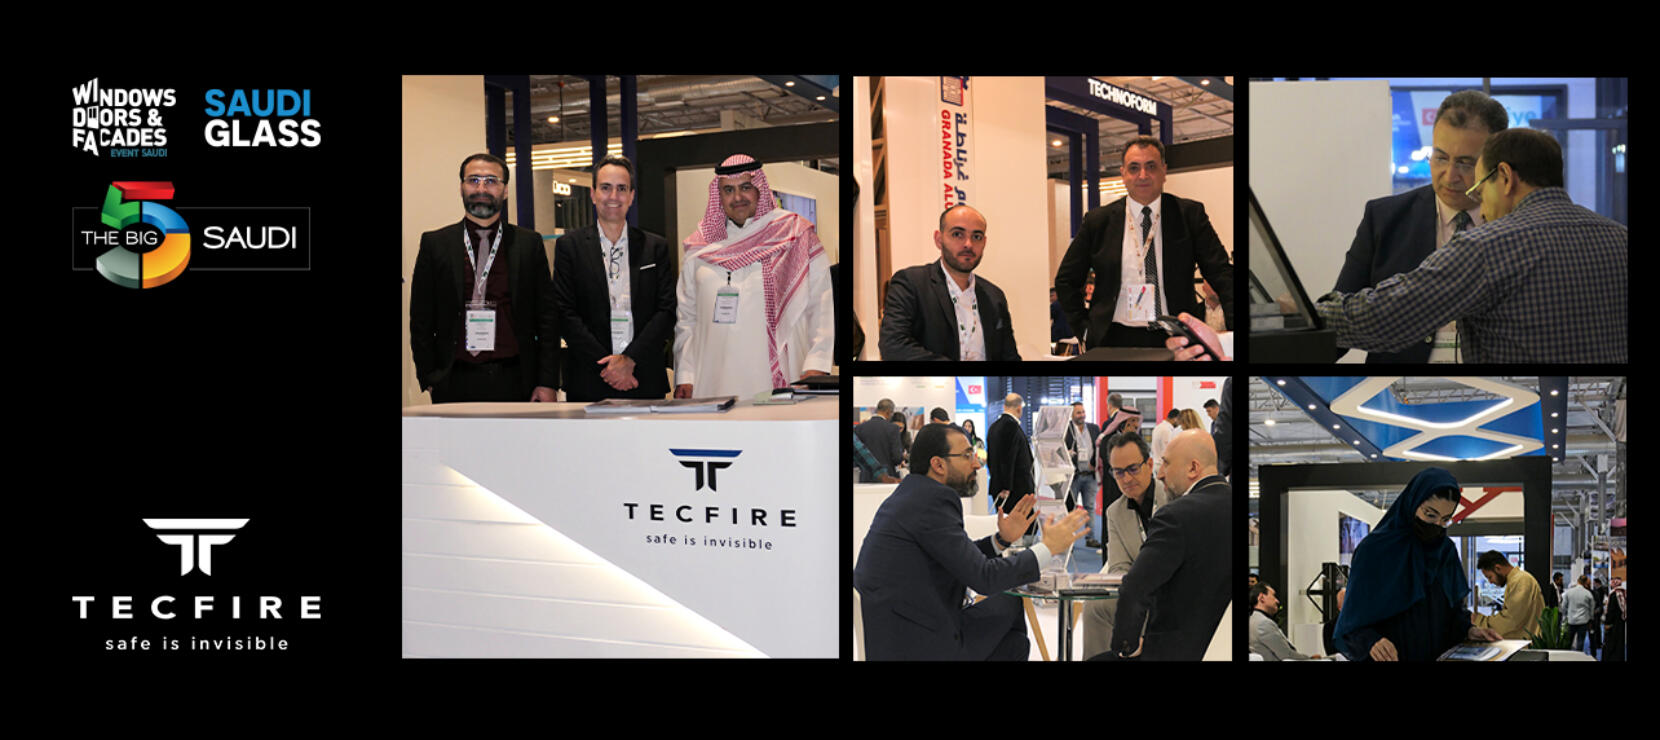 Tecfire concluded the Windows Doors & Facades Event with a complete success.